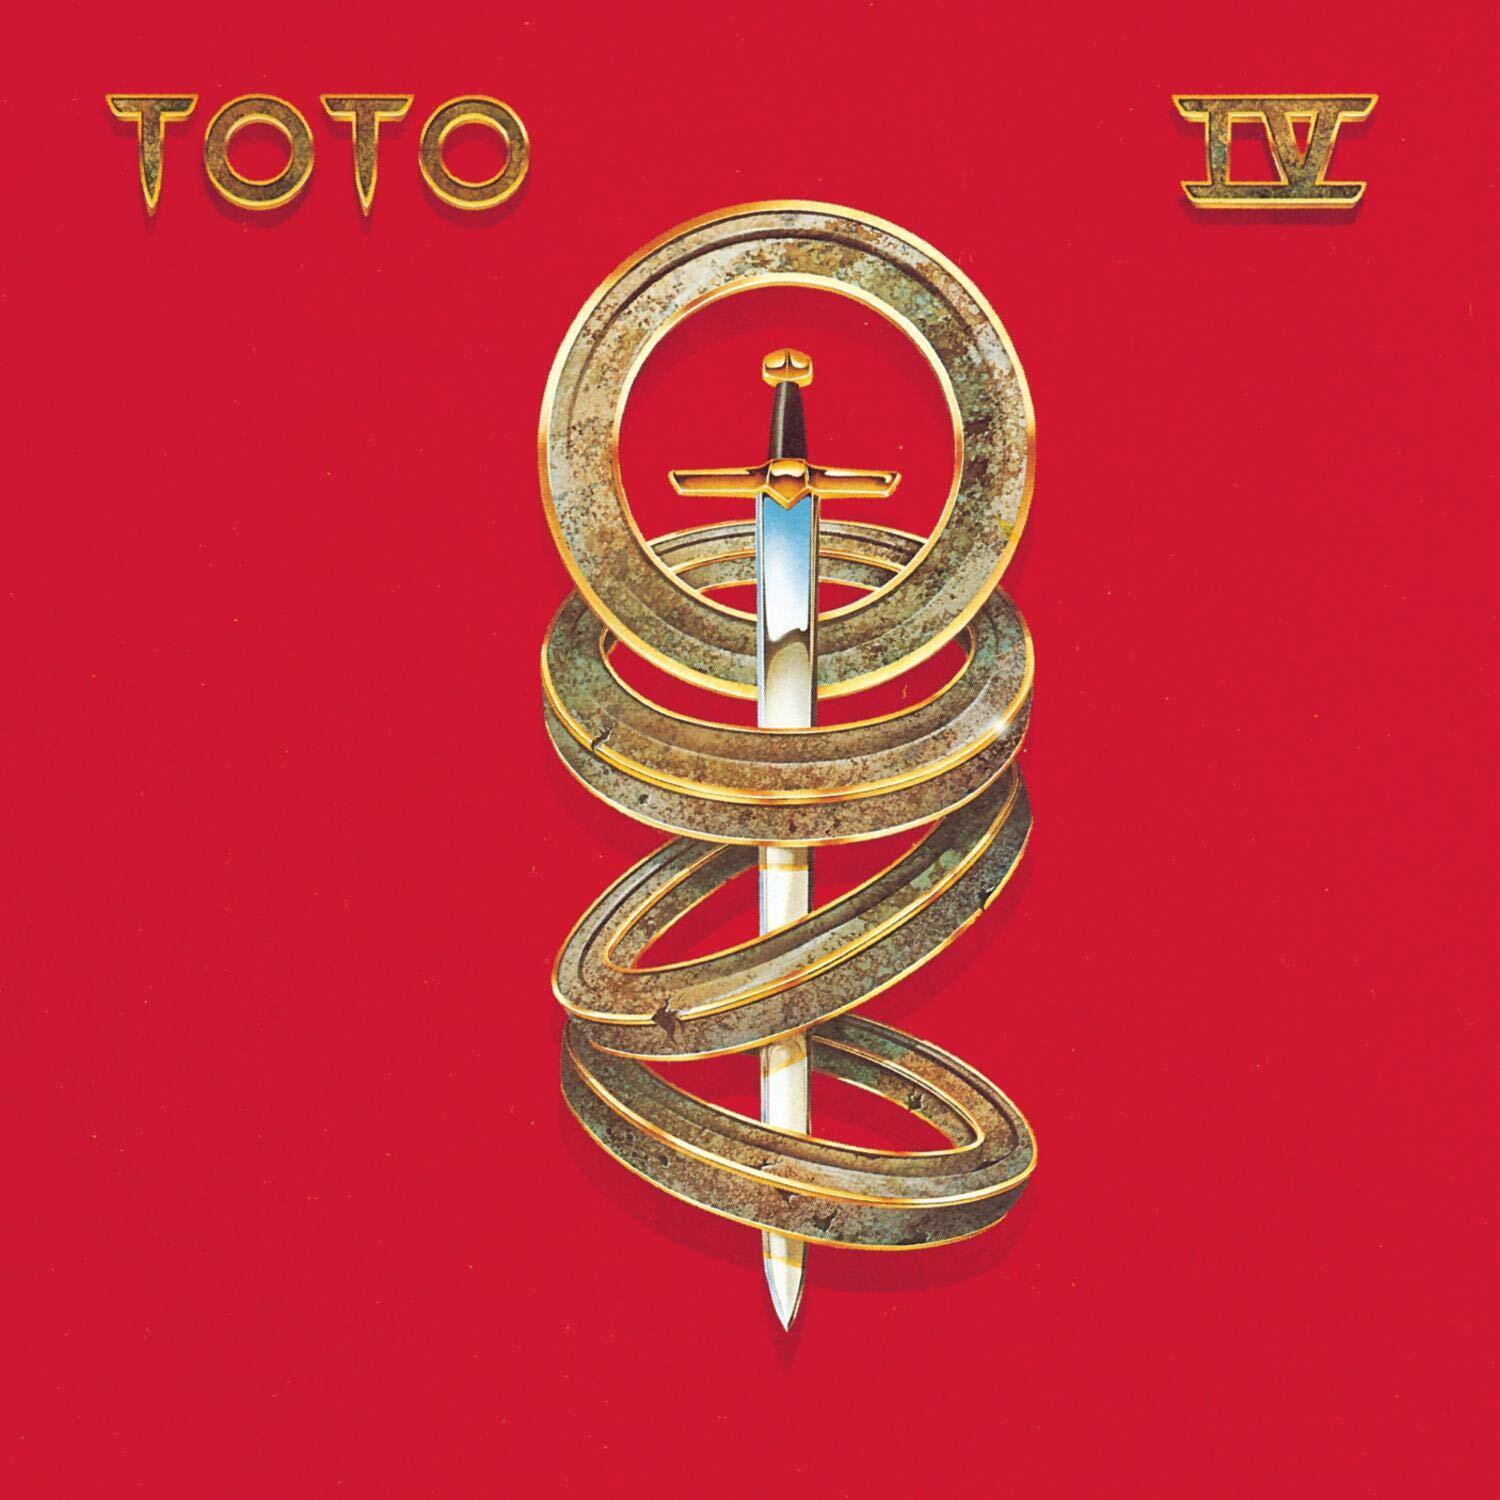 Toto Toto IV (CD)